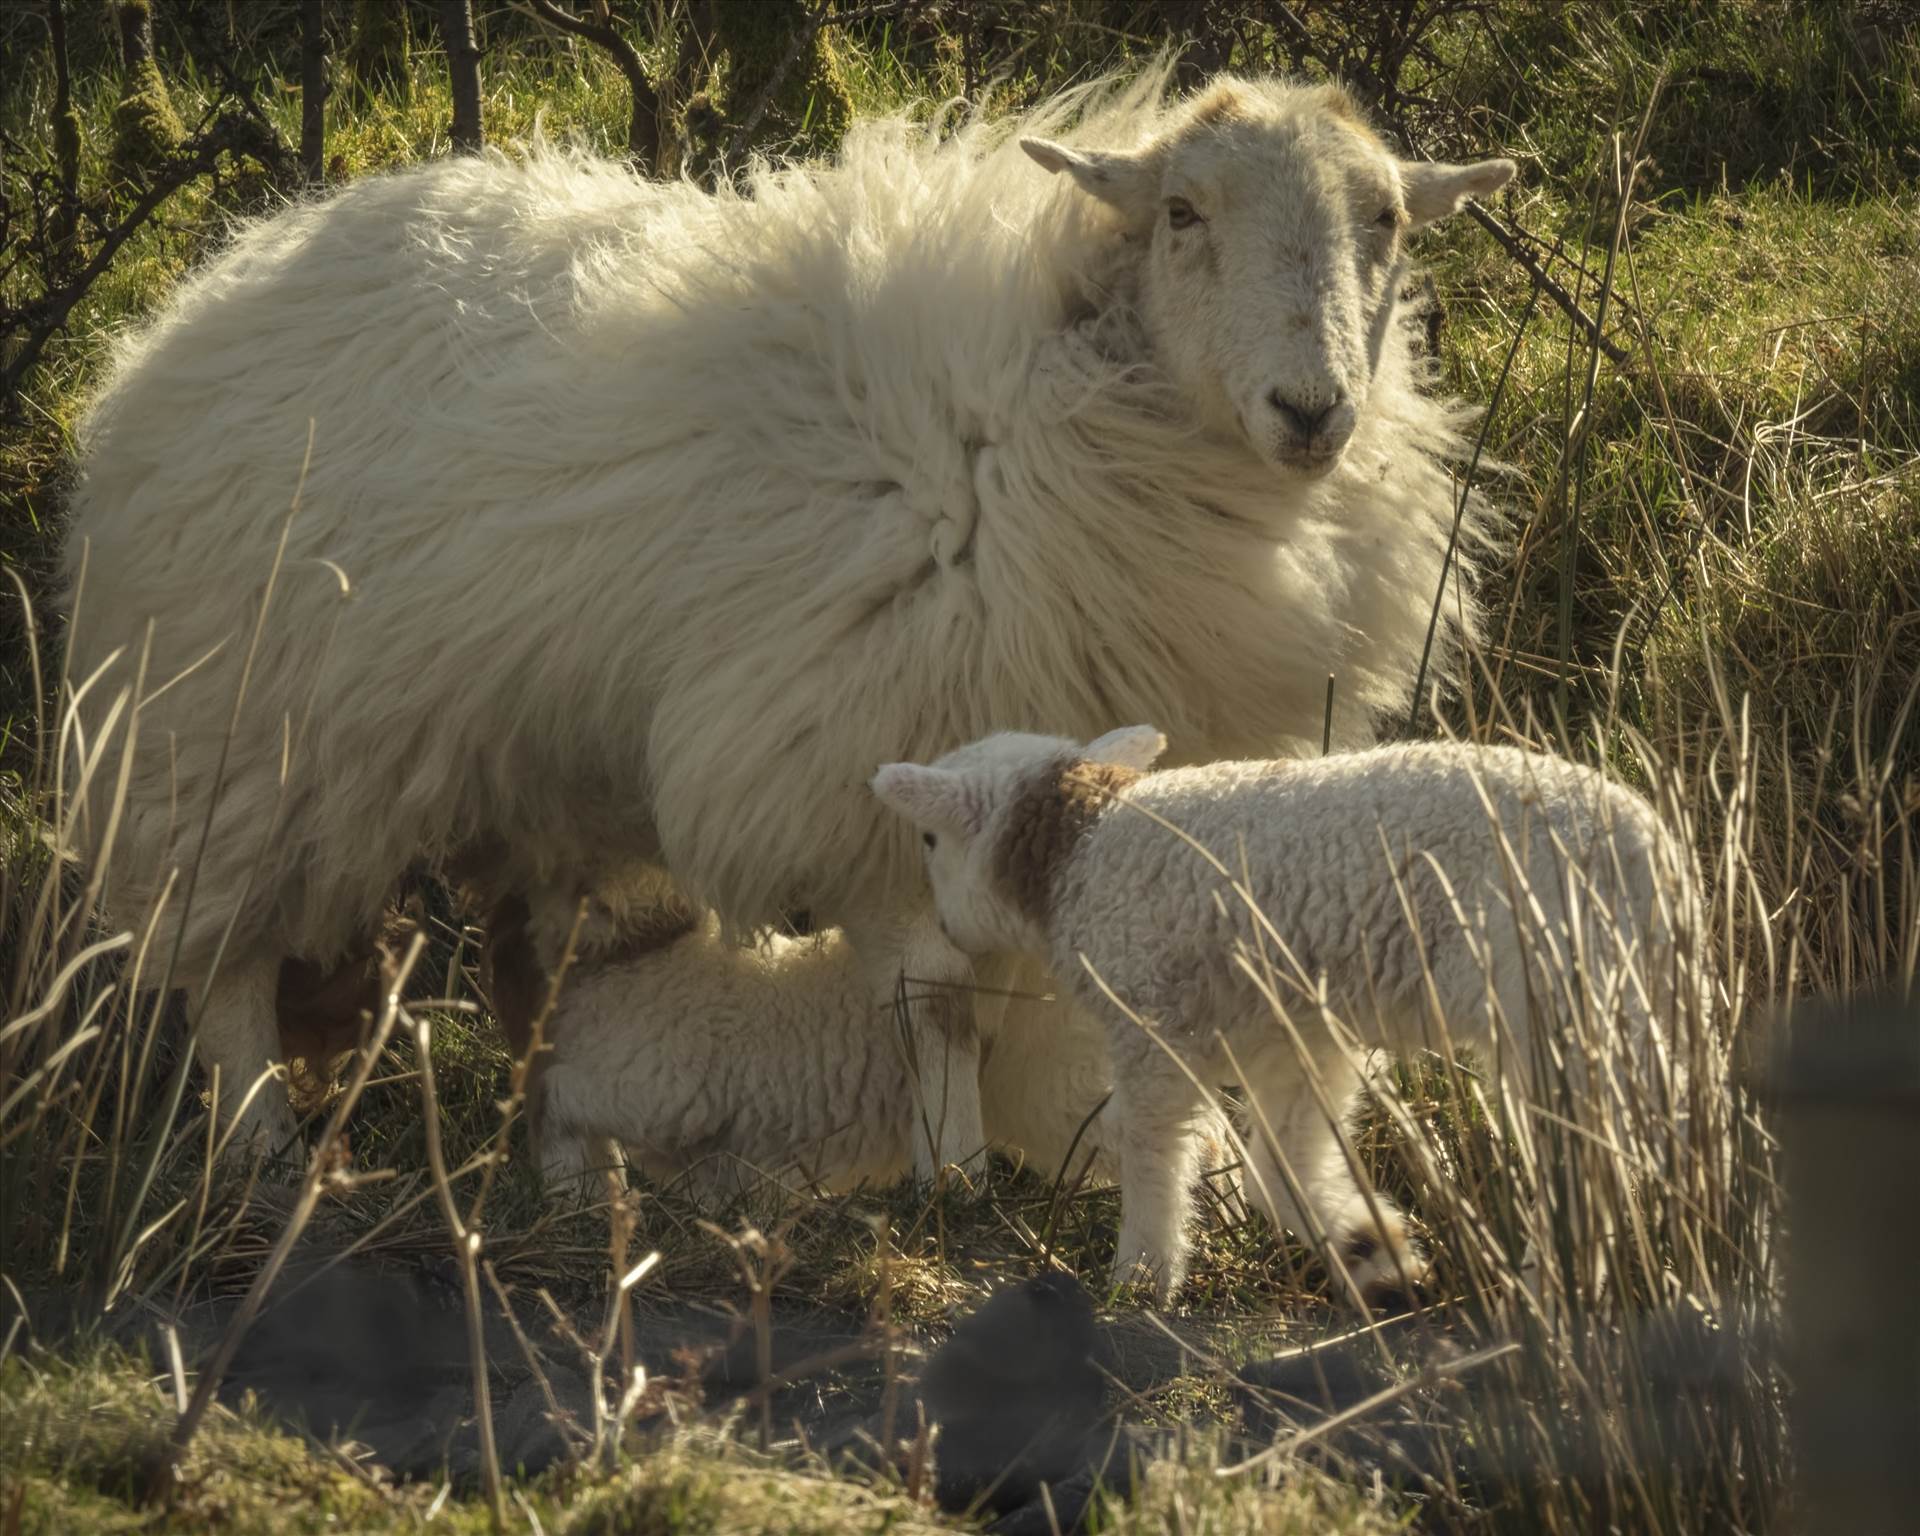 ewe and lambs10x8.jpg undefined by WPC-208